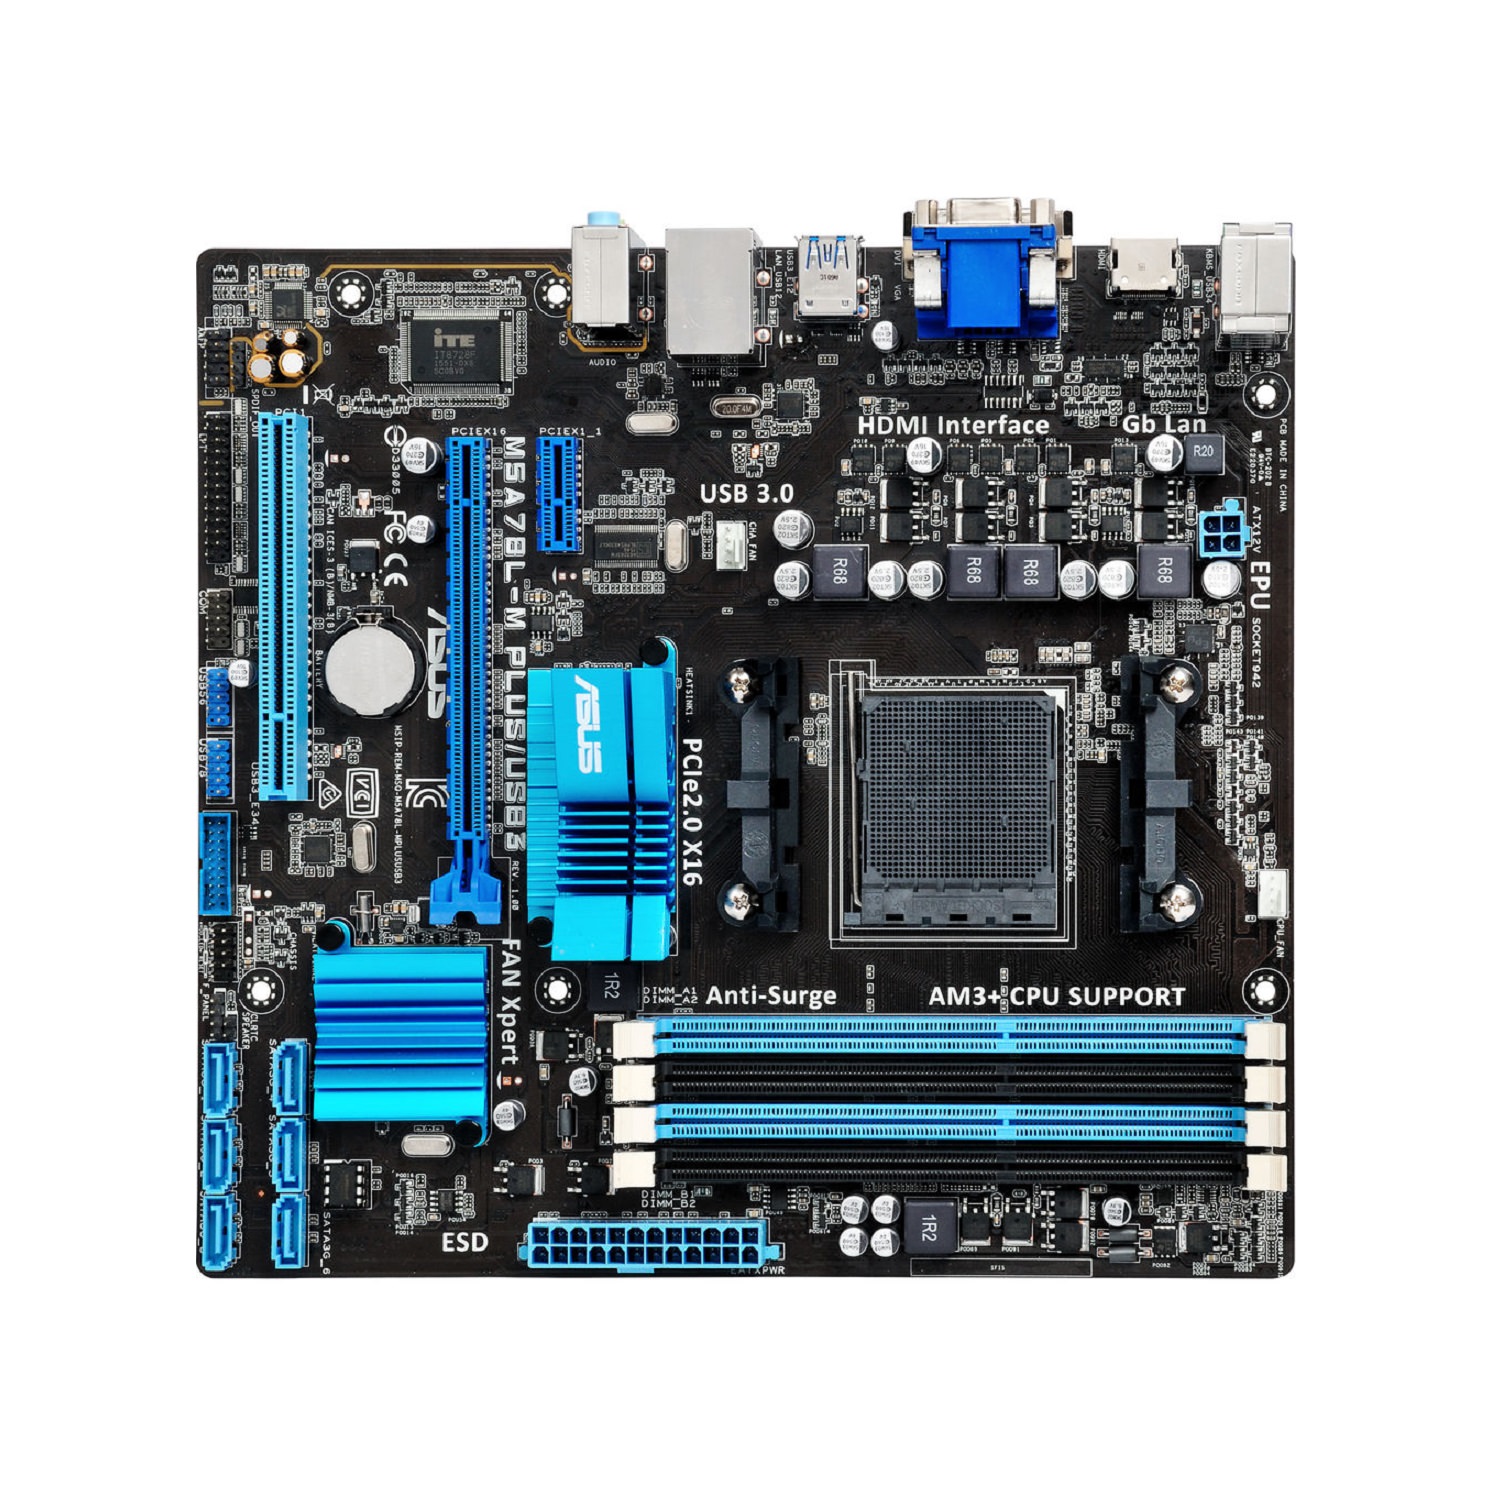 Asus M5A78L-M Plus/Usb3 Motherboard - M5A78L-M PLUS/USB3 - image 3 of 4